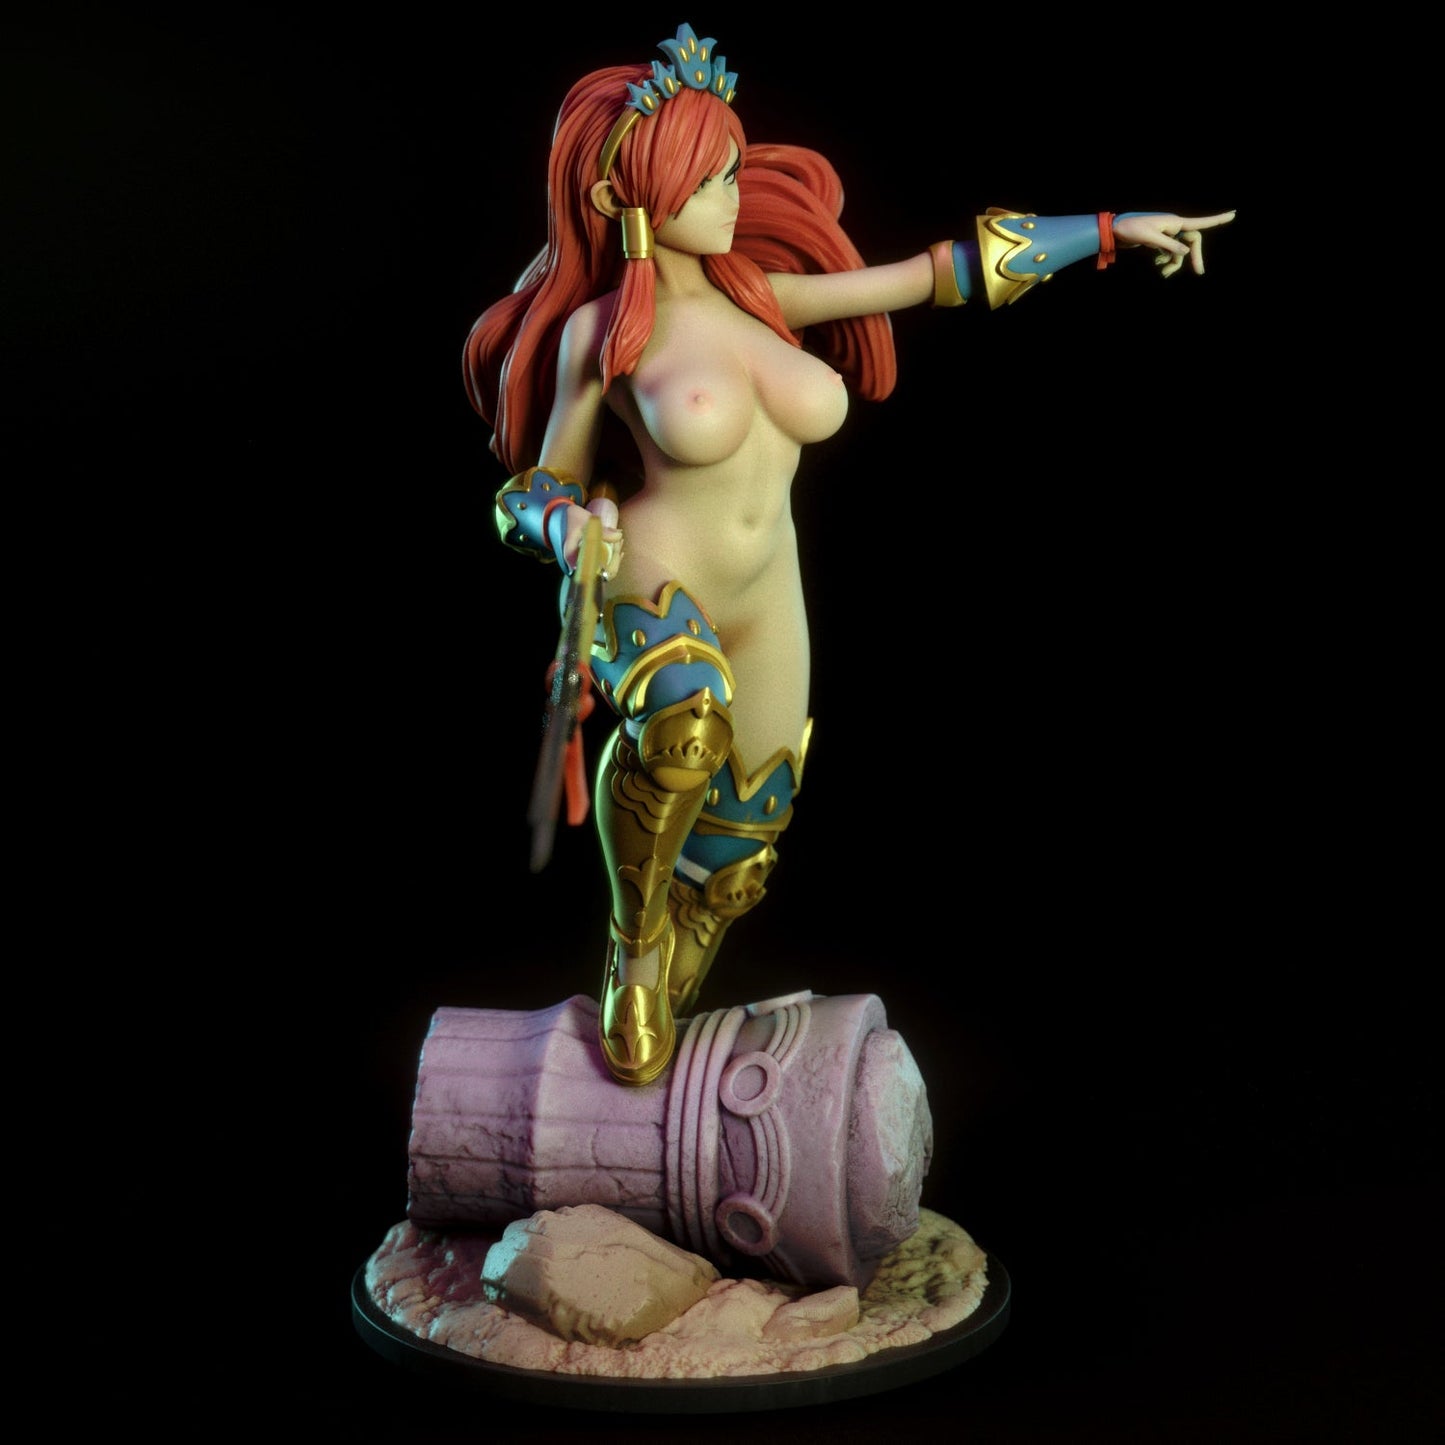 Erza Scarlet in her Nakagami armor anime NSFW 3D Printed figure Fanart by Torrida Minis